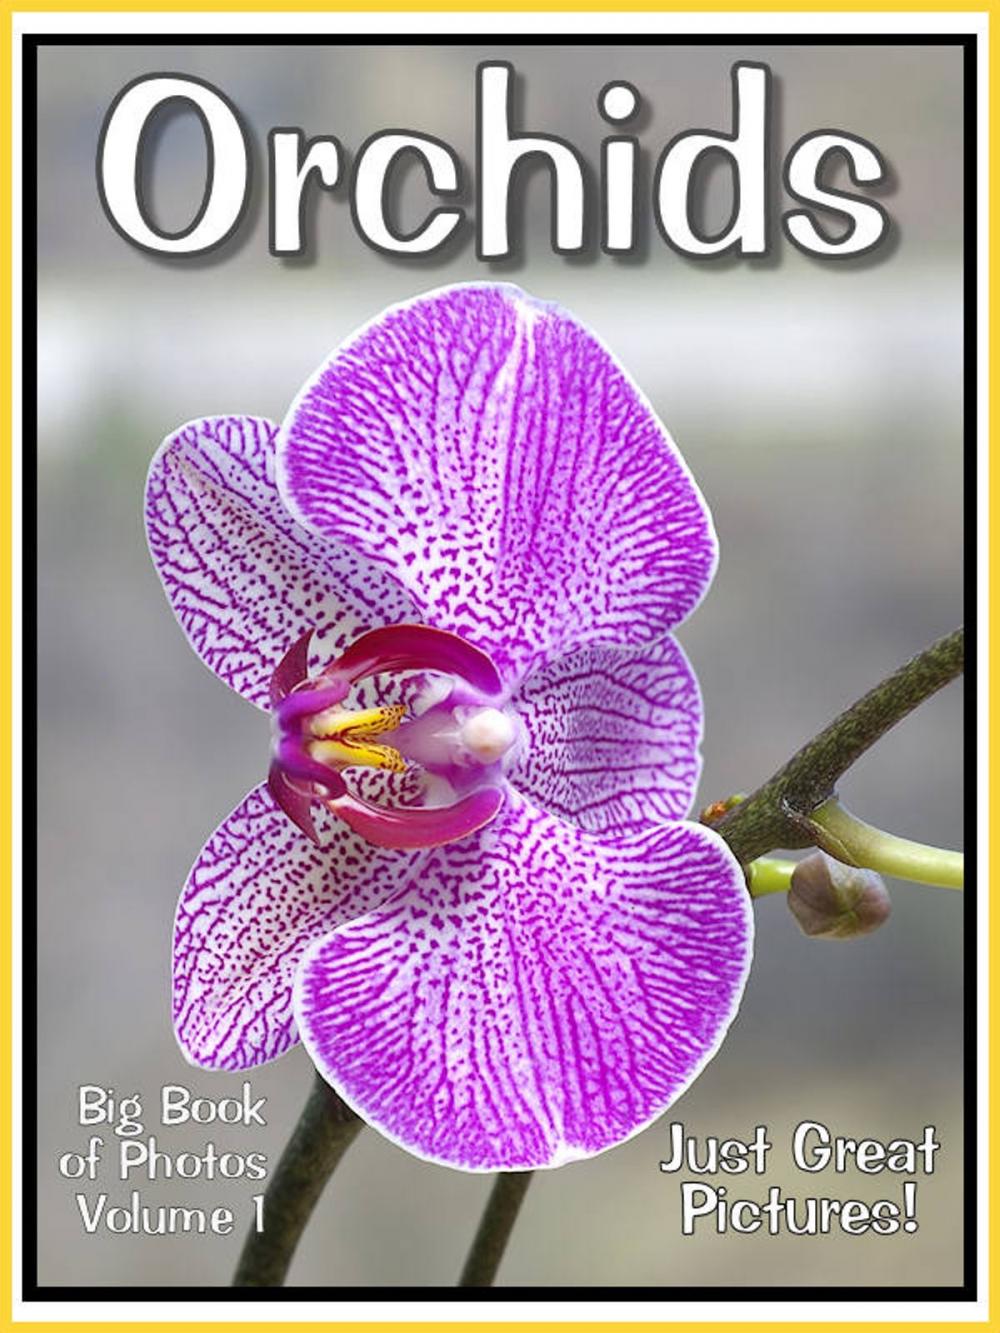 Big bigCover of Just Orchid Photos! Big Book of Photographs & Pictures of Orchids, Vol. 1